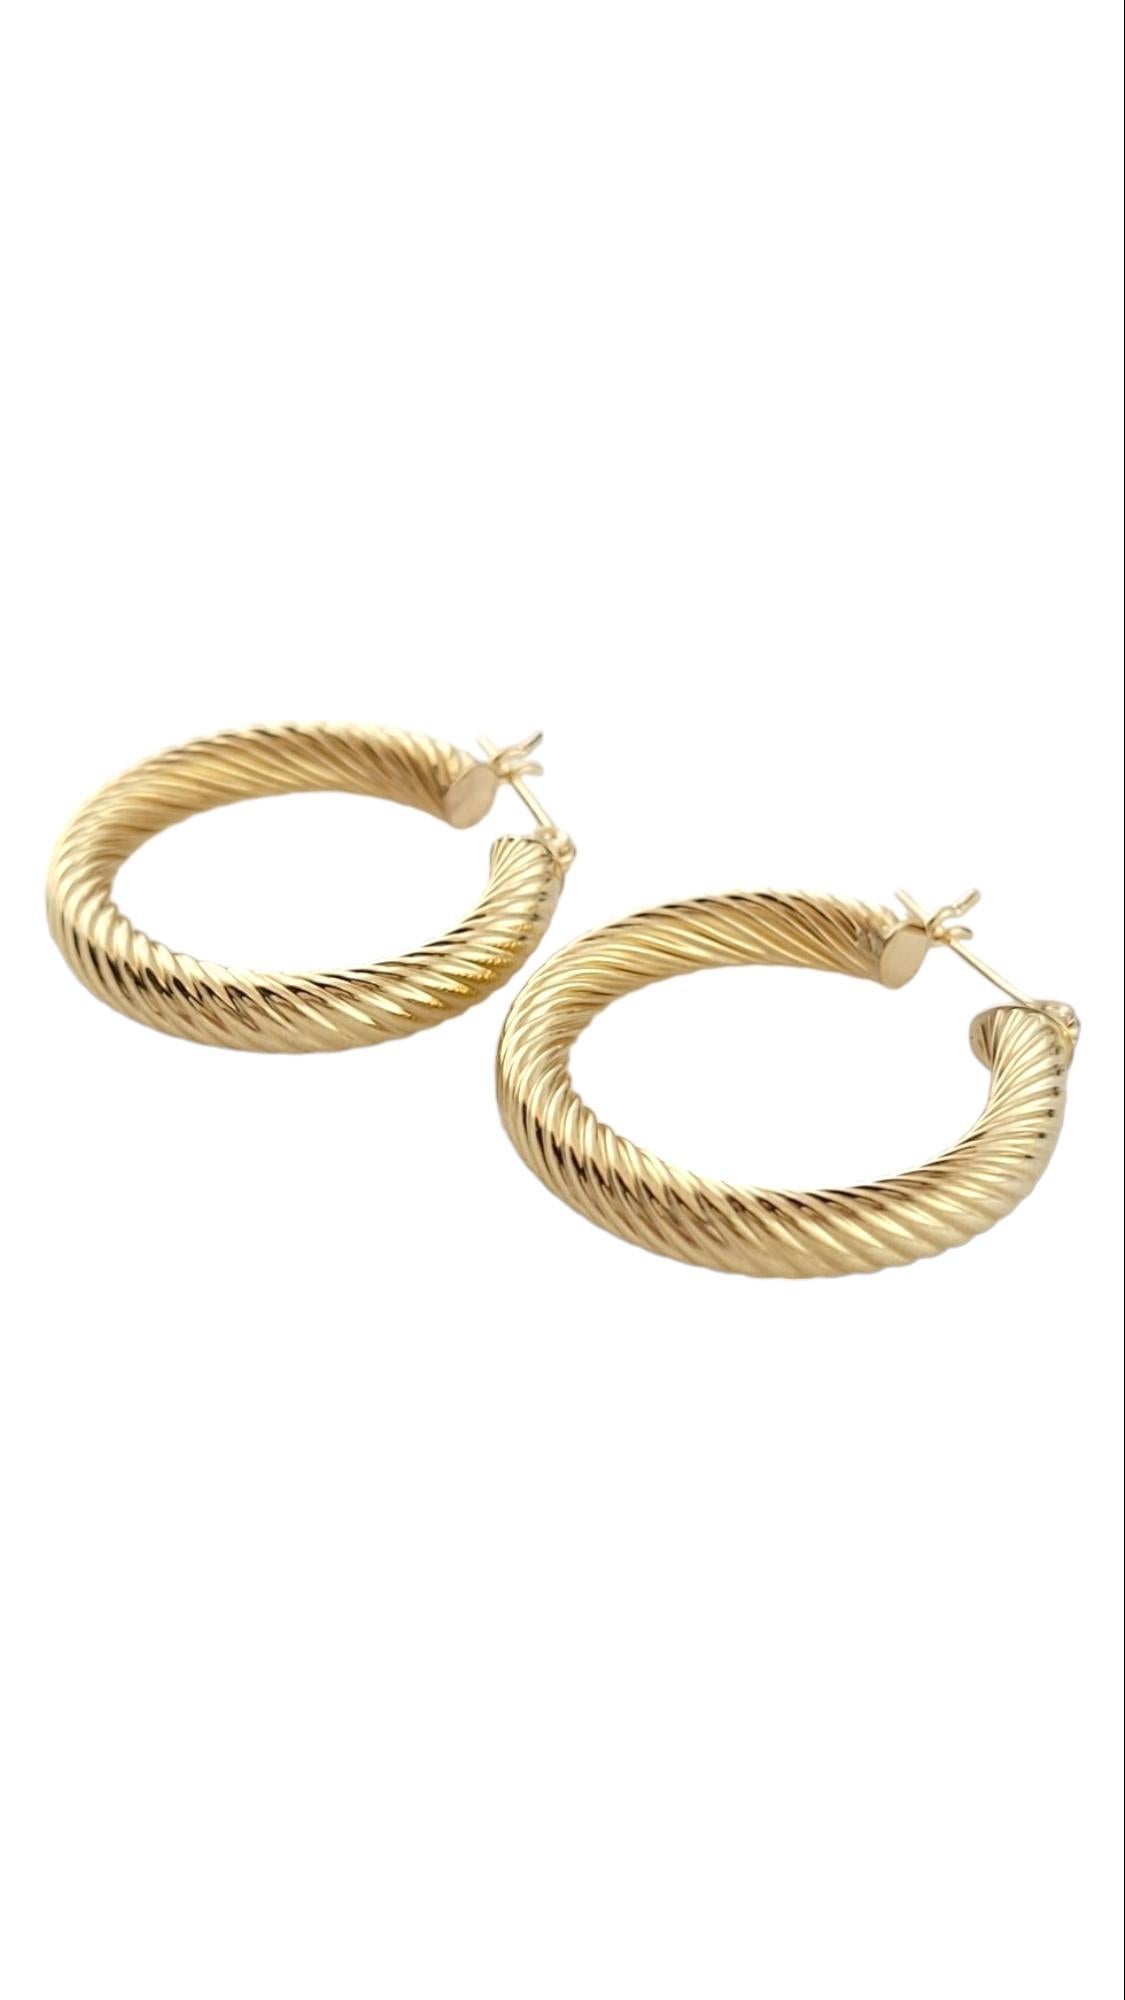 14K Yellow Gold Cable Hoop Earrings

This gorgeous set of hoops have a delicate twisted pattern for a beautiful finish

Diameter: 25.4mm / 1